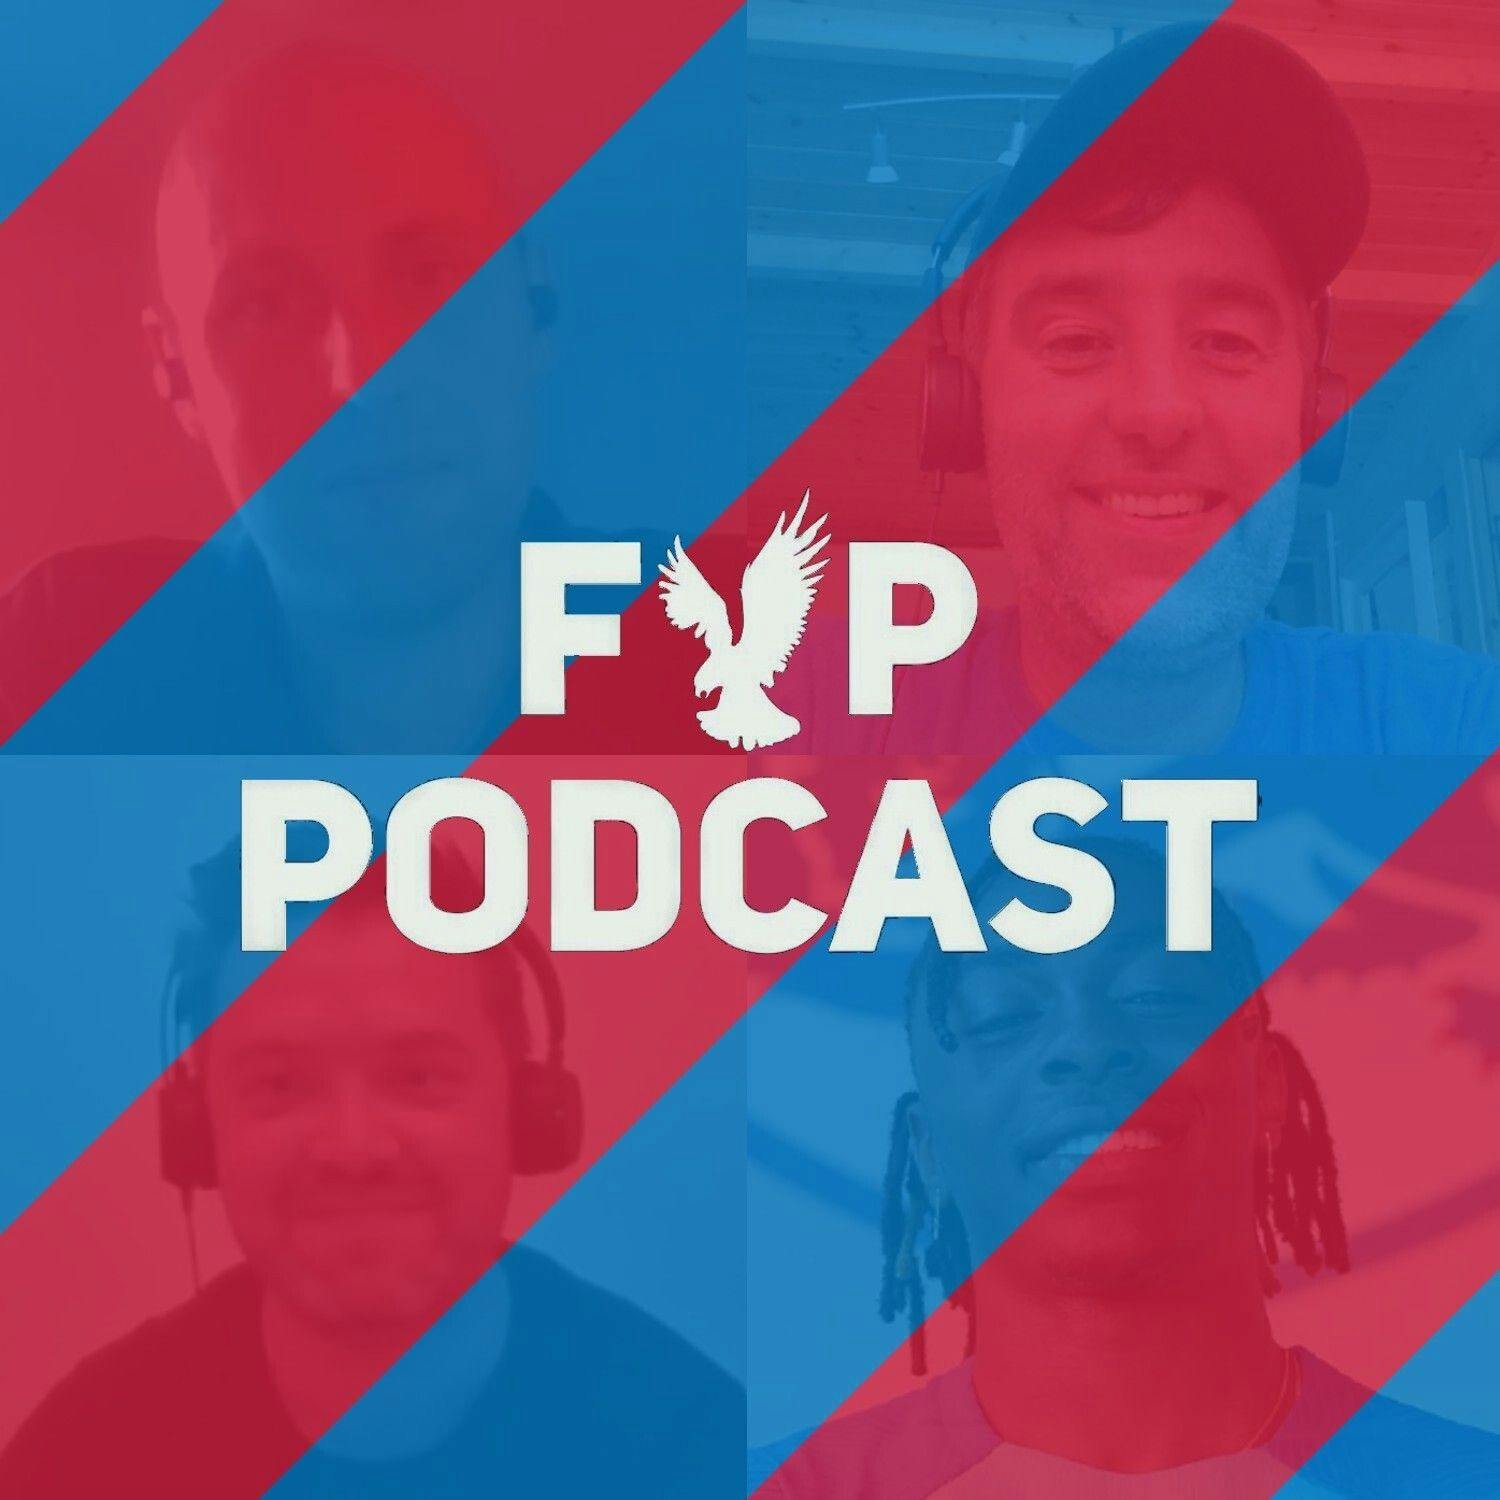 FYP Podcast 477 | Ebere Eze's Journey (with Clive Whittingham of Loft For Words)